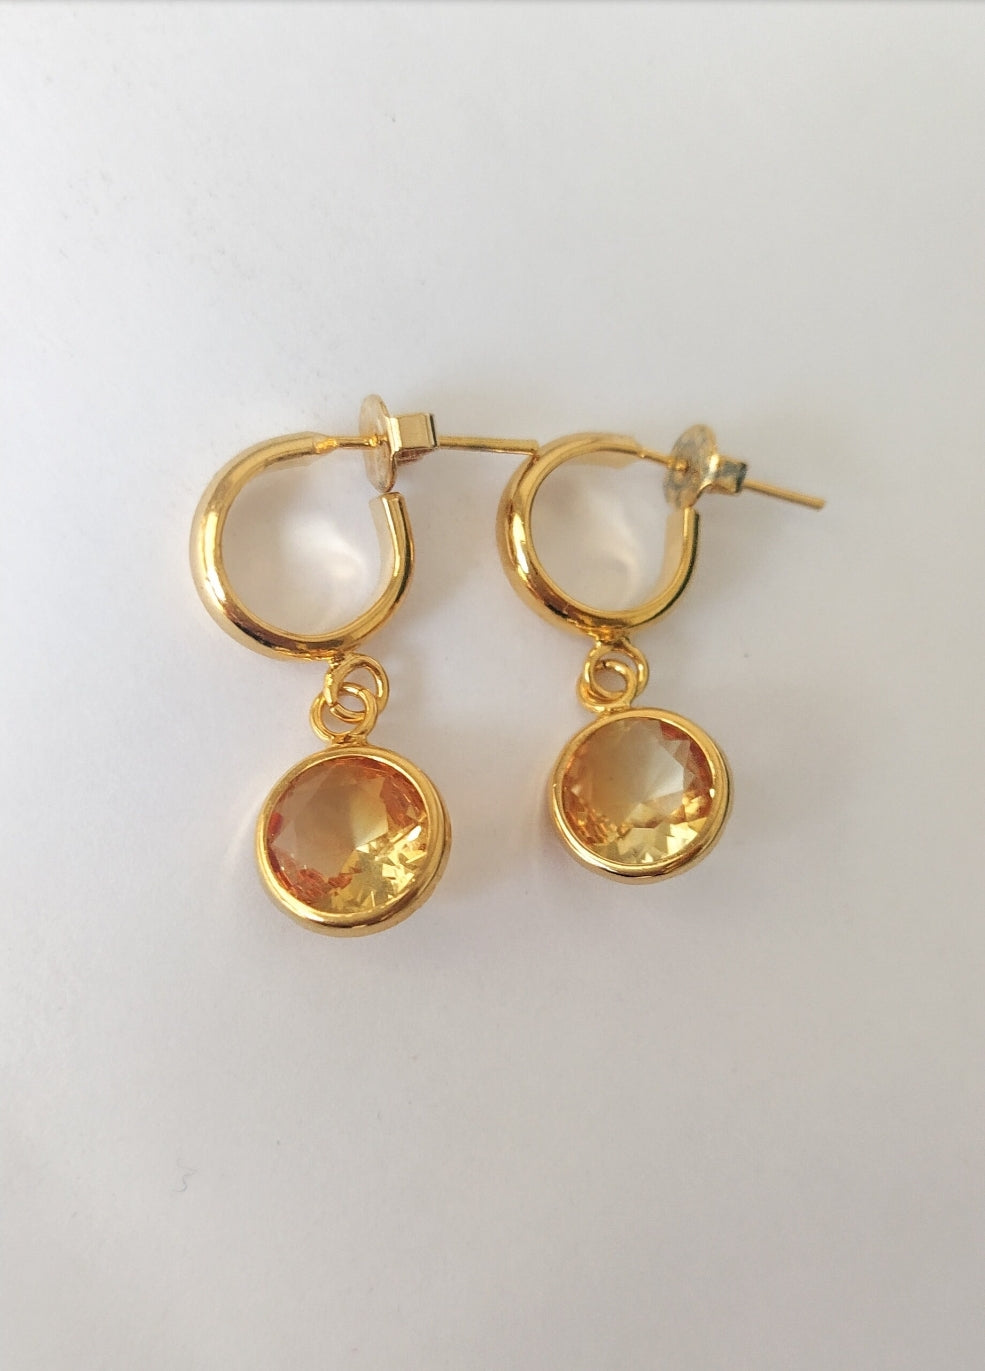 Gold Ambar Crystal Earrings. For special occasions. Flourish Collection. Handmade by Ariadna Echenique. Gold plated